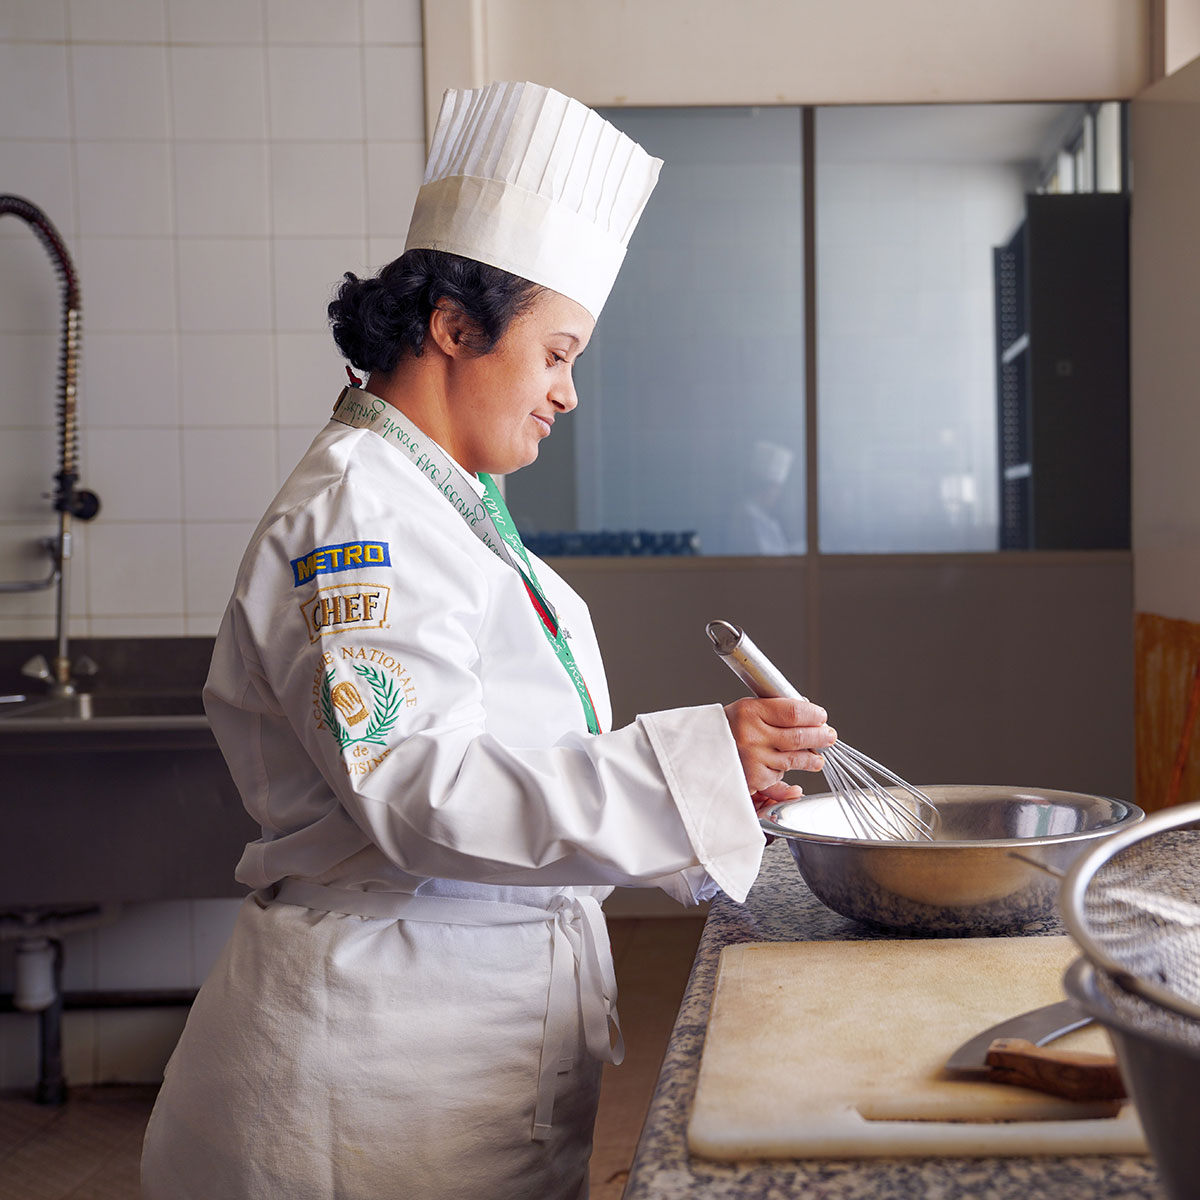 Lobna is in a chef’s hat stands, in a commercial kitchen, smiling down at her mixing bowl and holding a whisk.